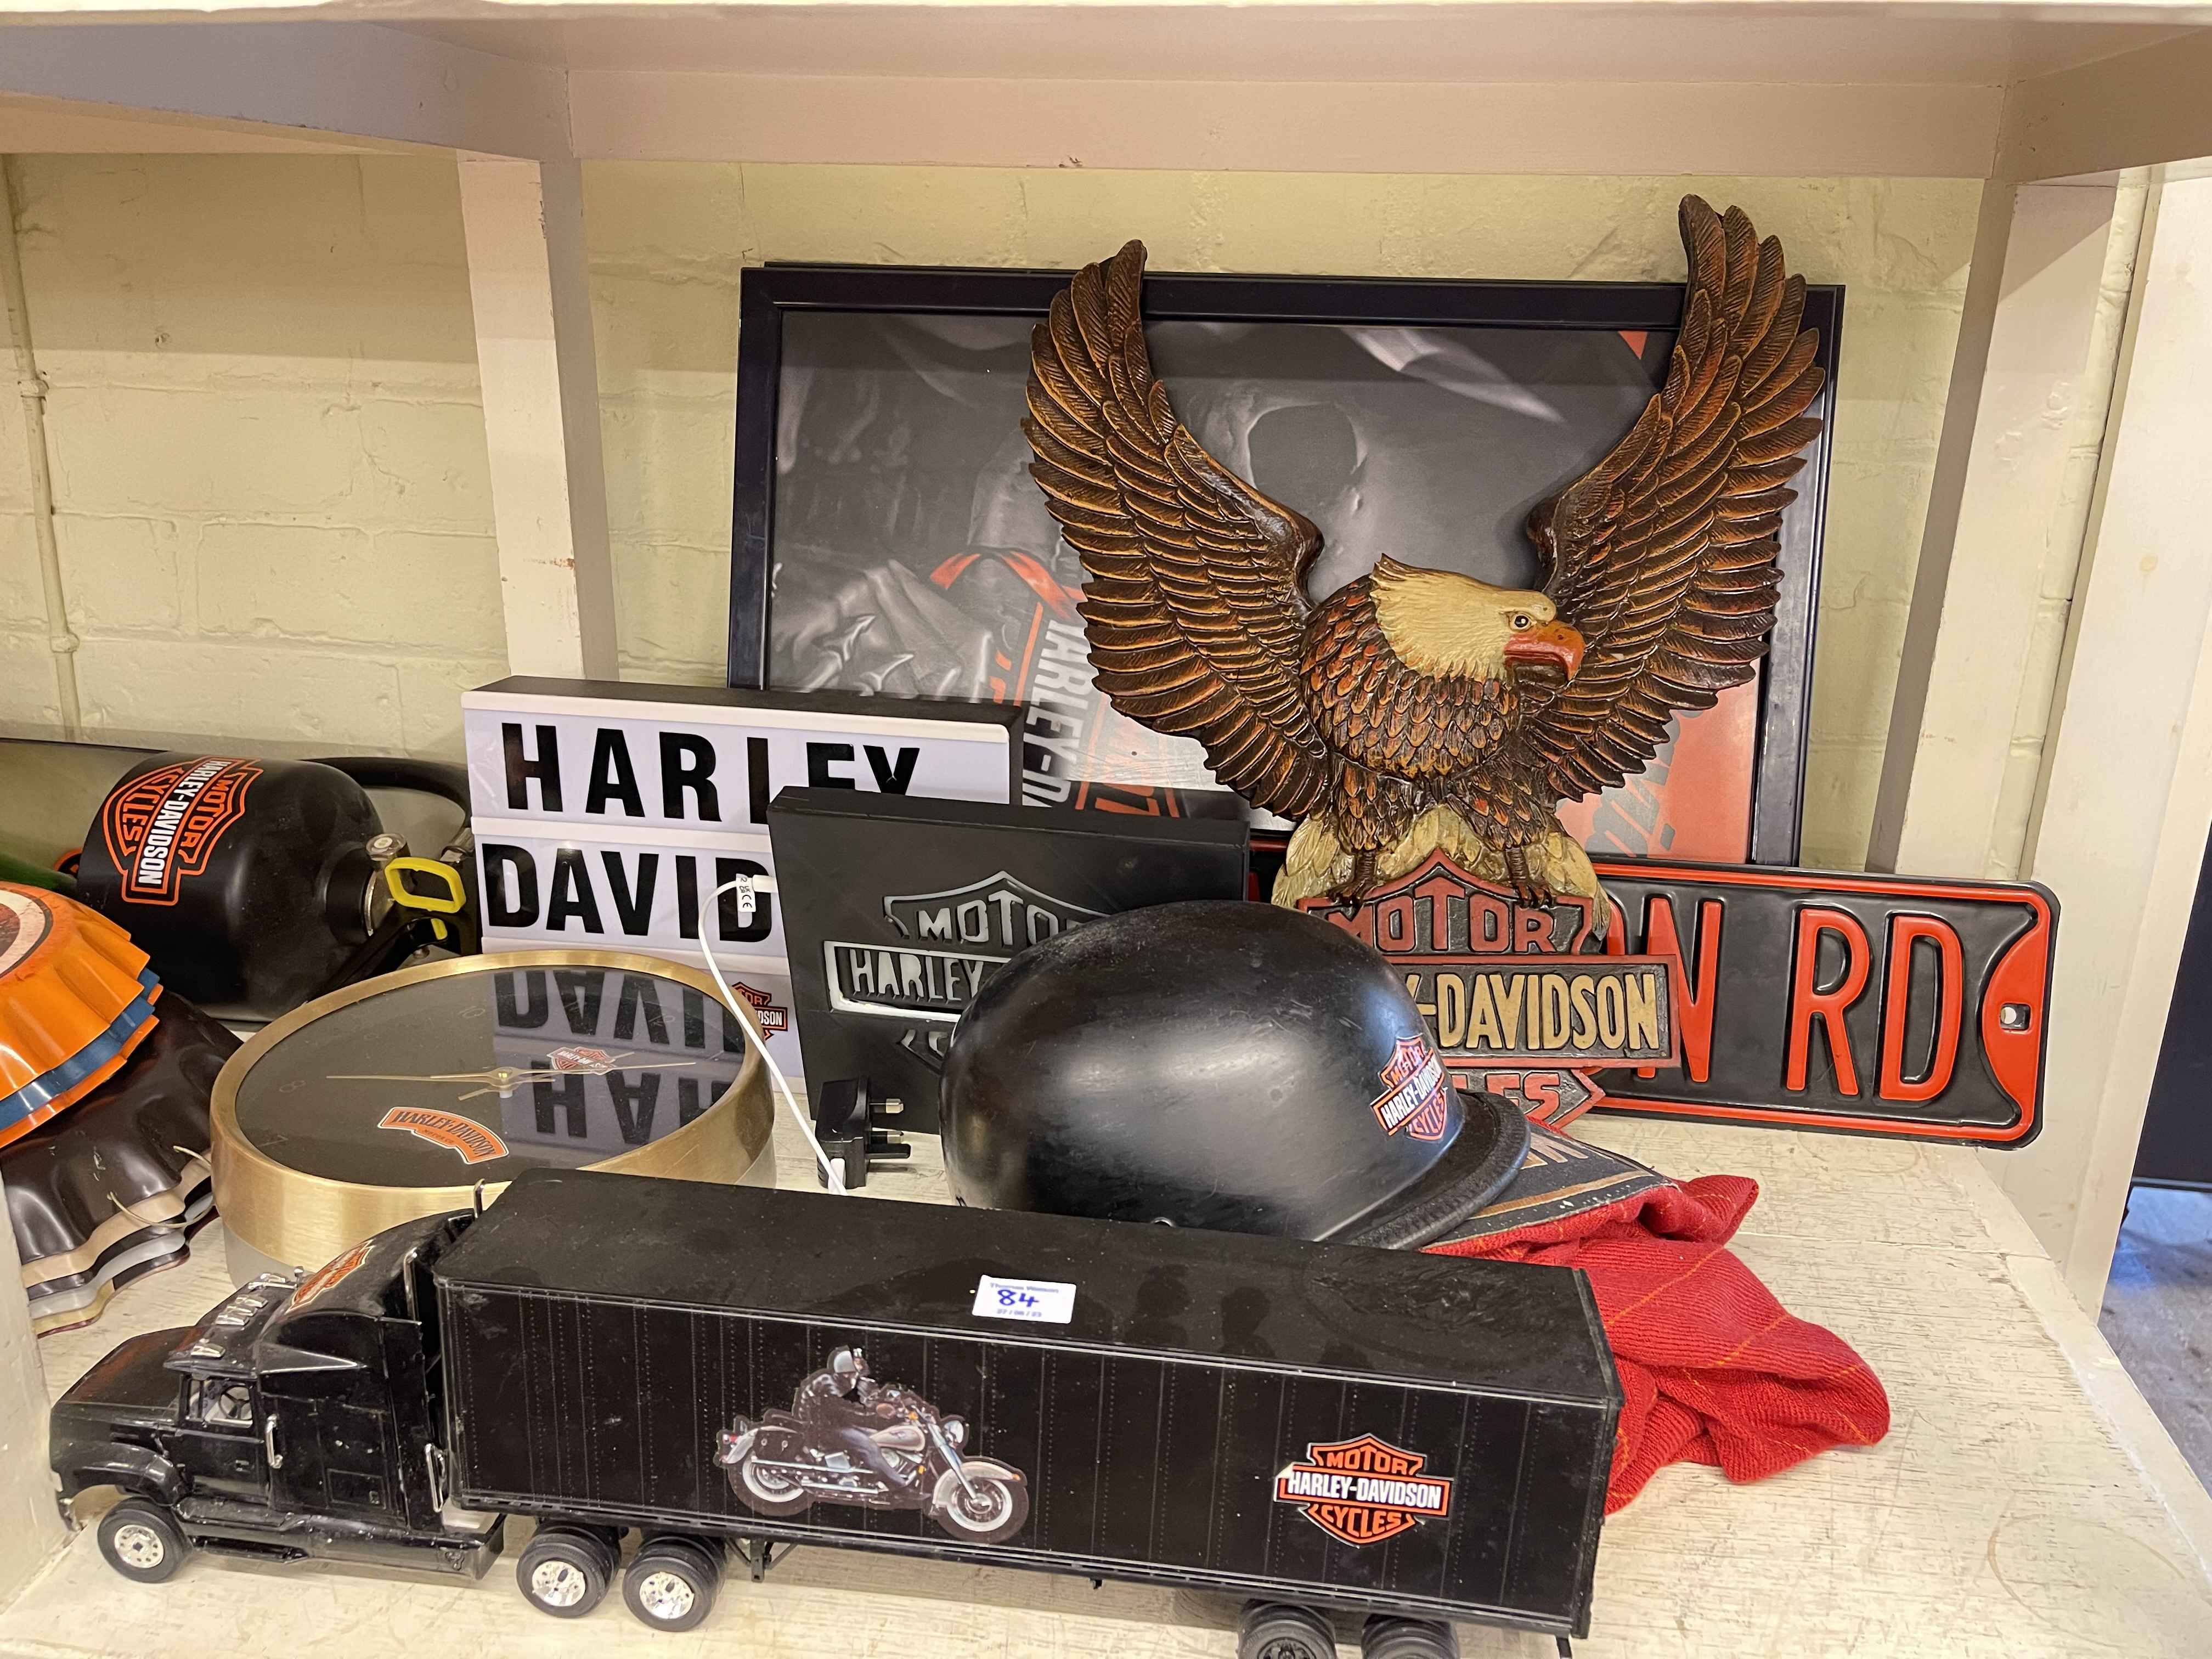 Collection of Harley Davidson memorabilia, model motorcycles, trucks and emergency vehicles, etc. - Image 2 of 6